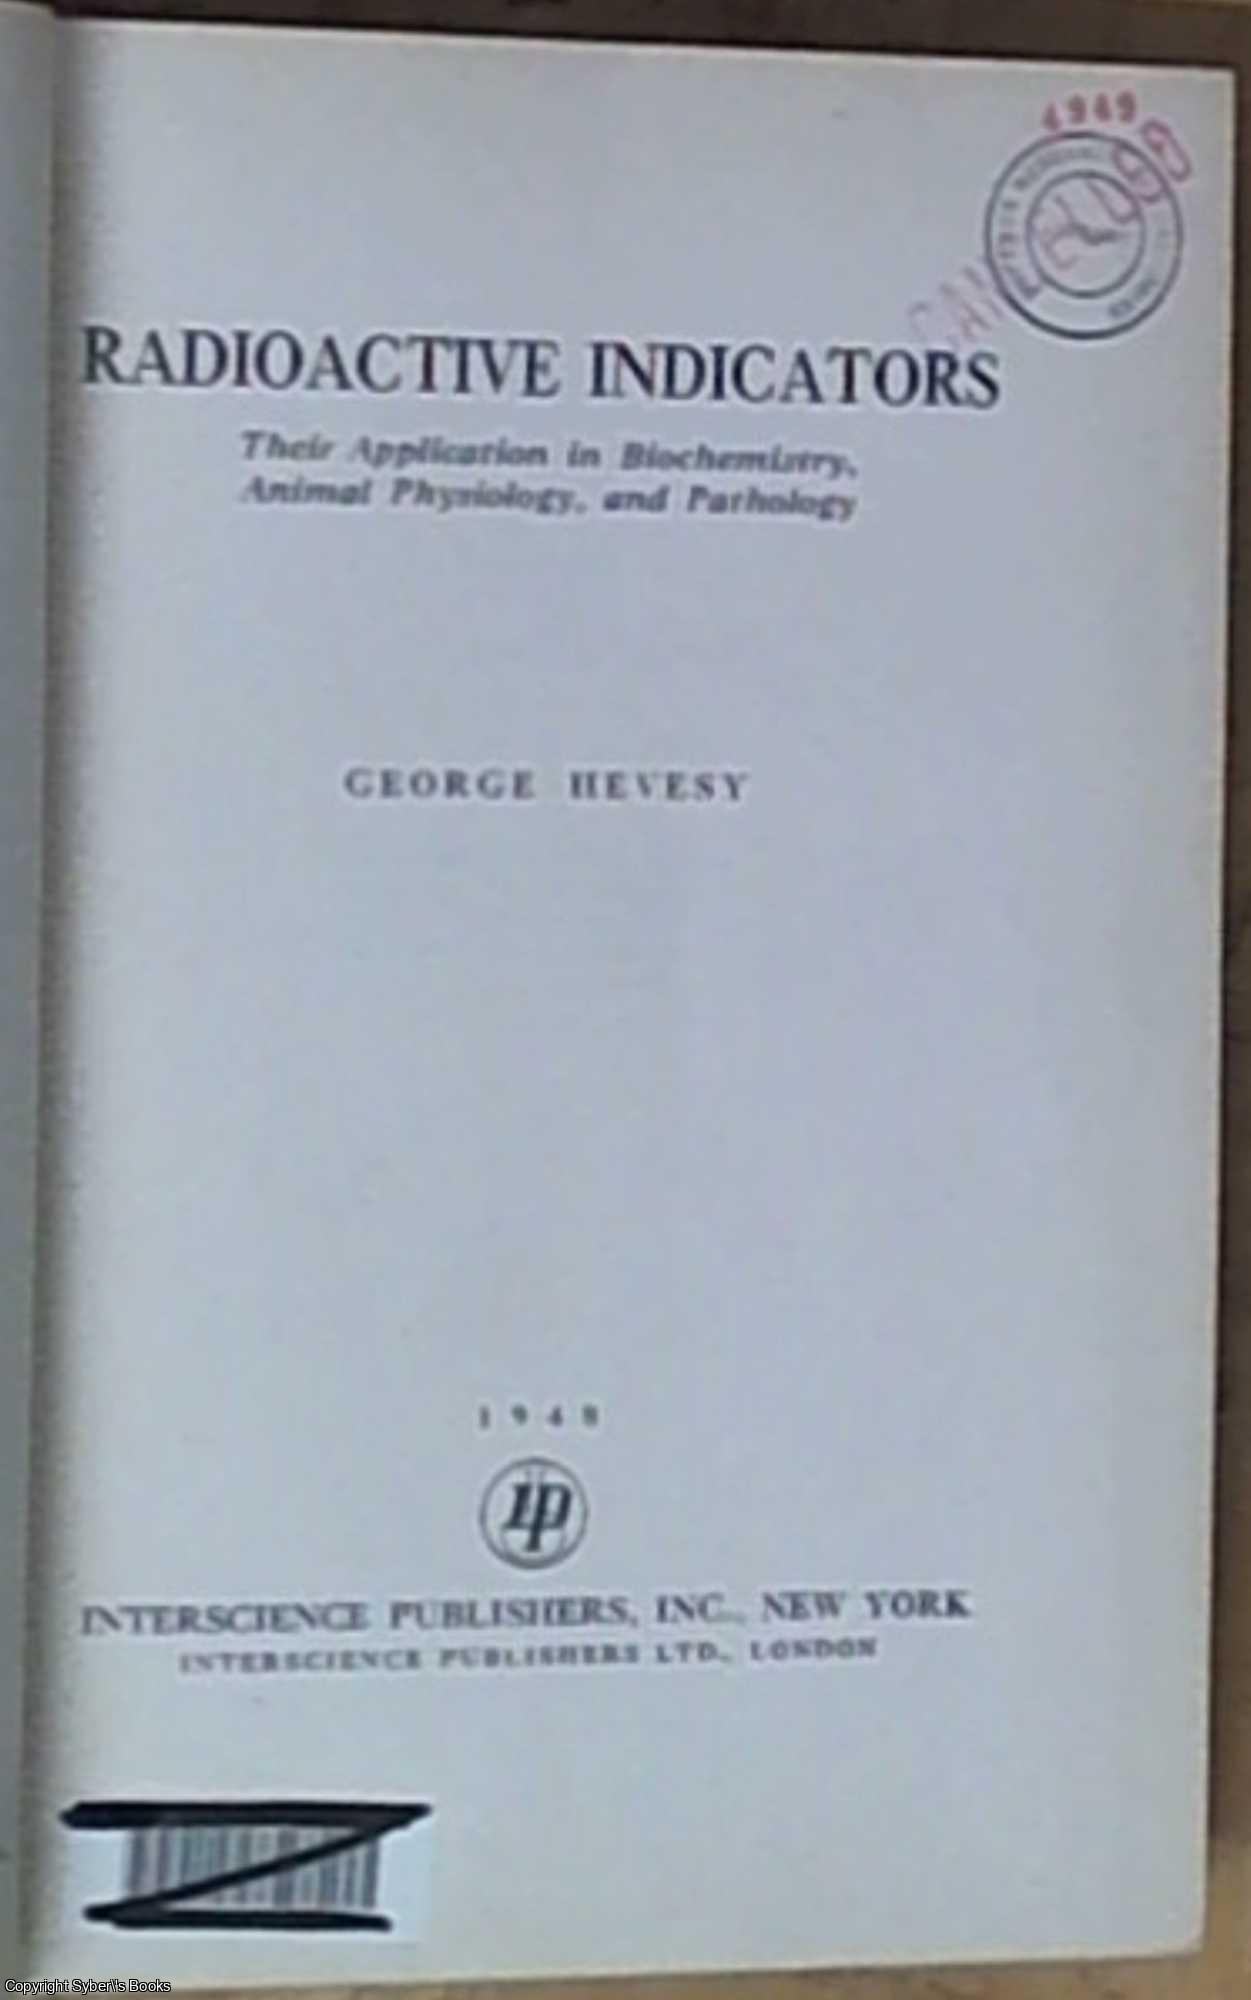 Hevesy, George - Radioactive Indicators - Their Application in Biochemistry, Animal Physiology, and Pathology